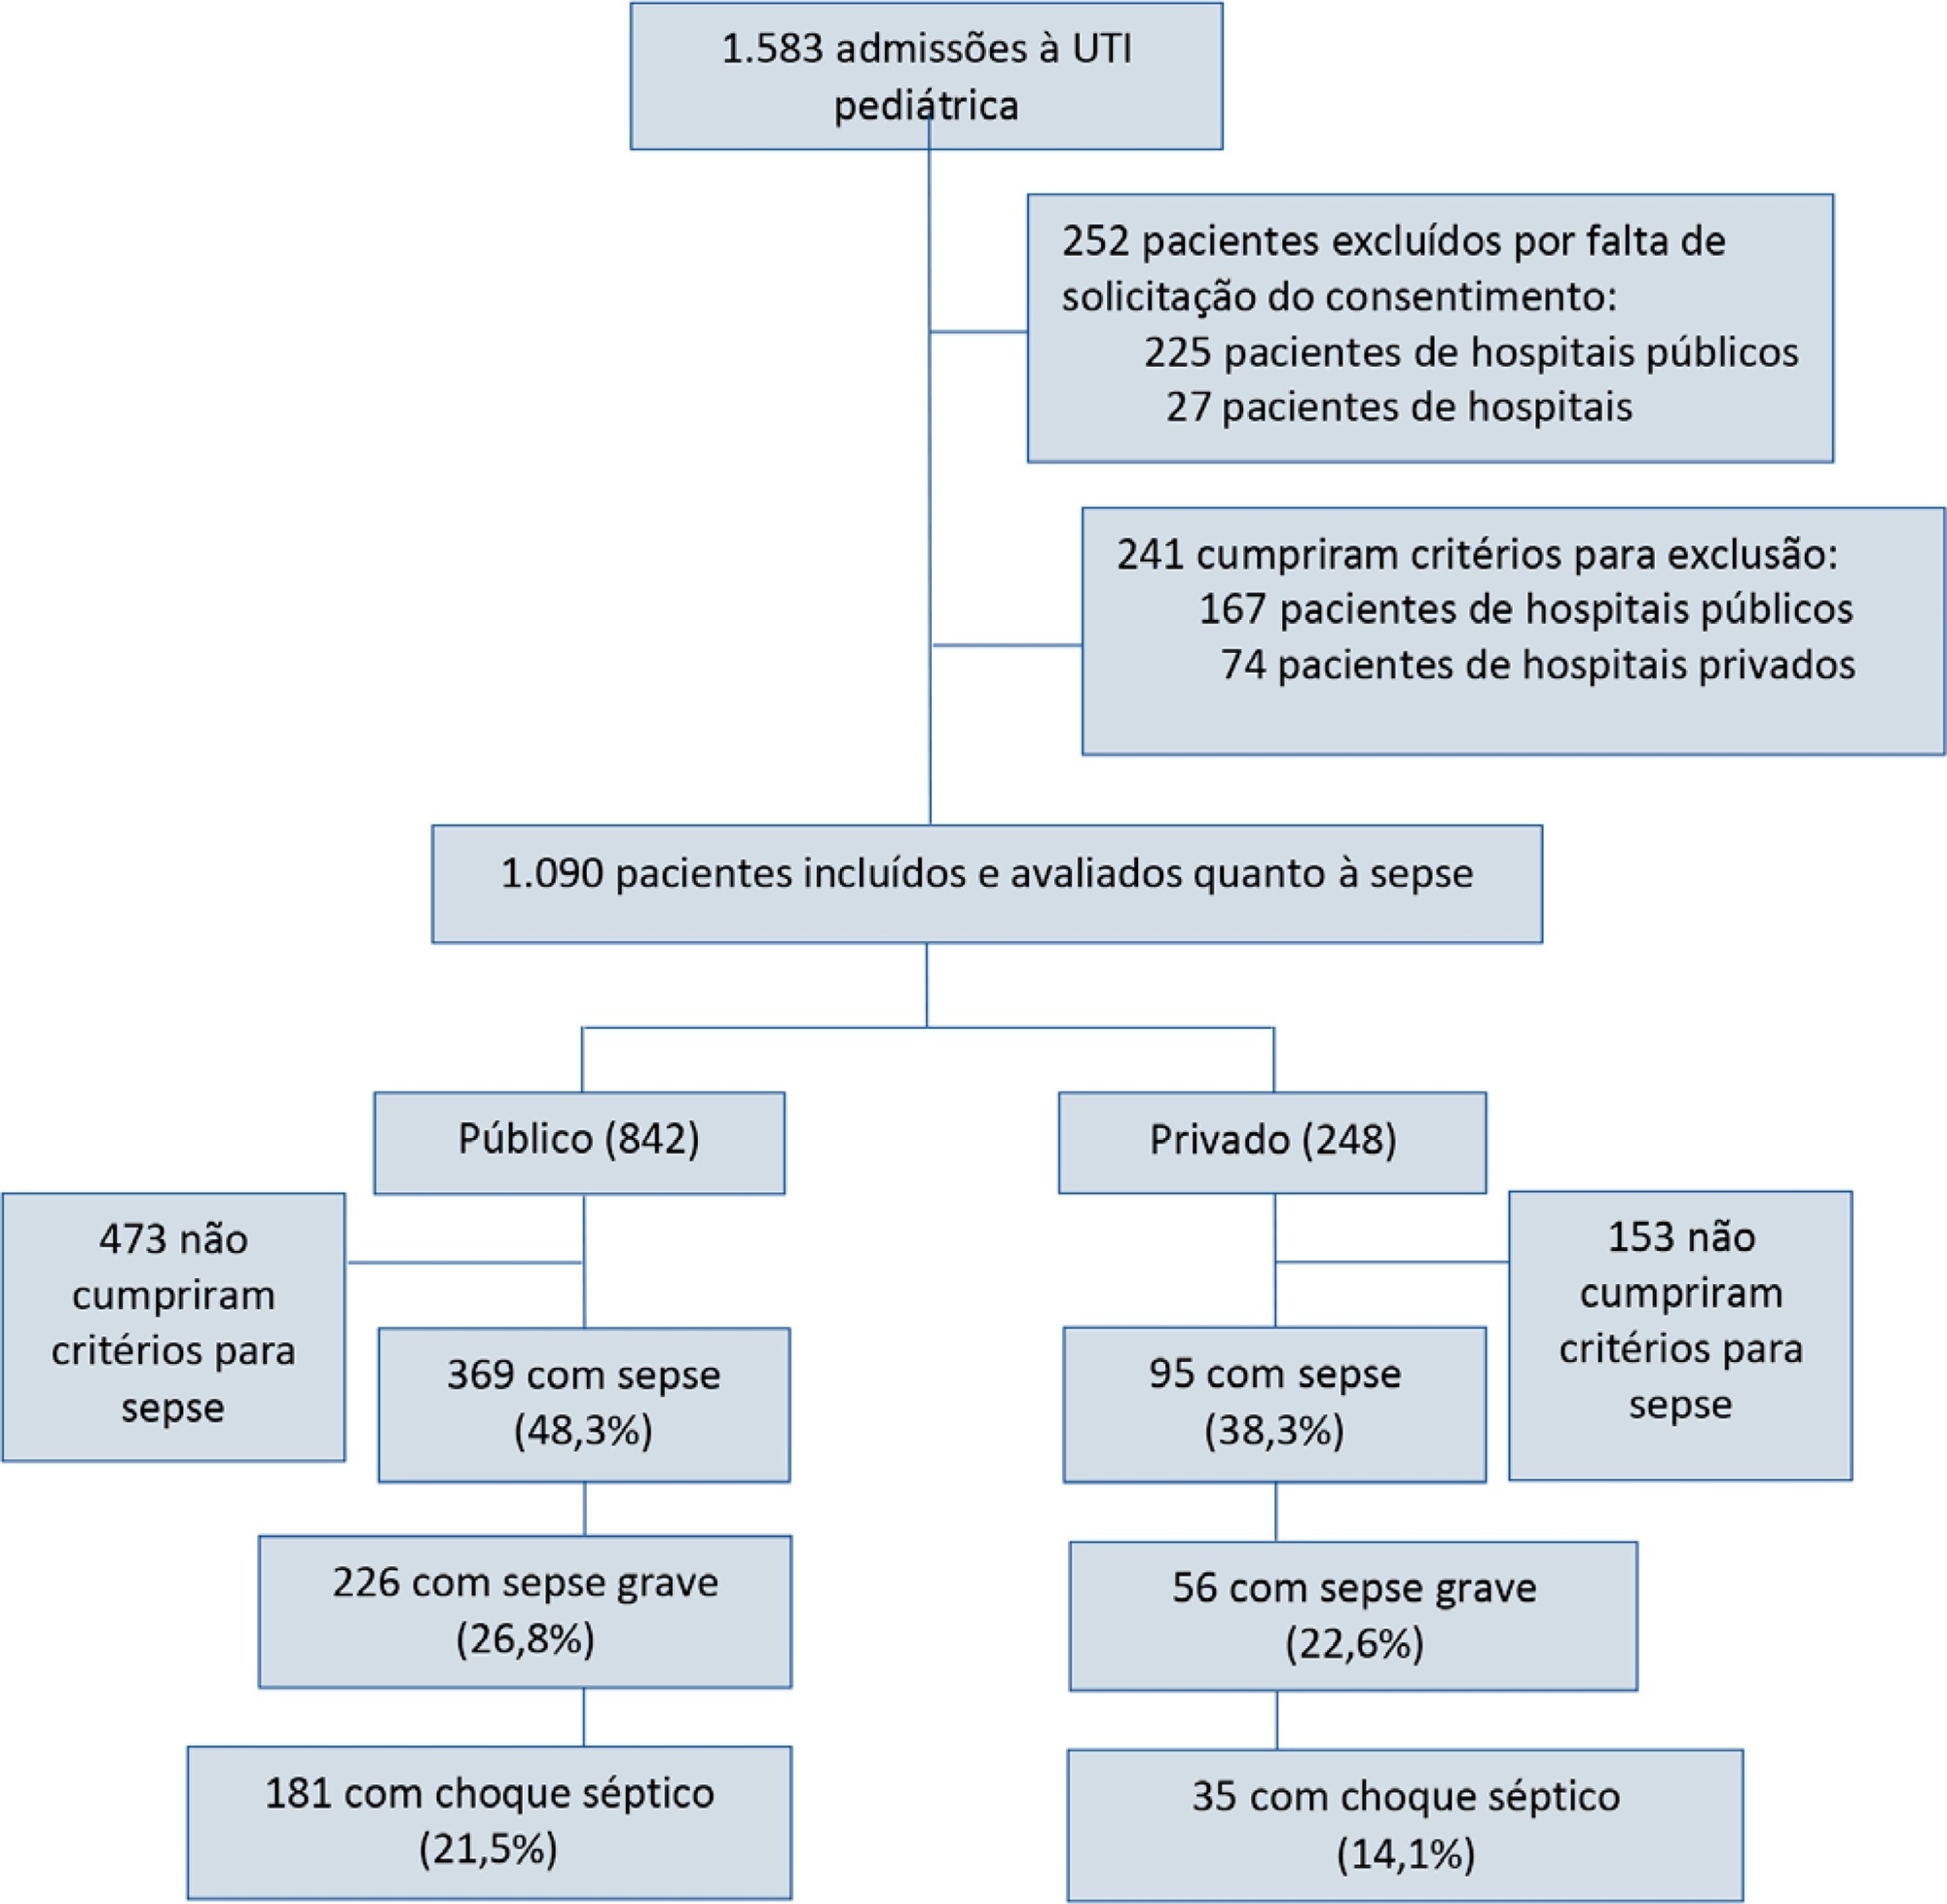 Prevalence and outcomes of sepsis in children admitted to public and private hospitals in Latin America: a multicenter observational study